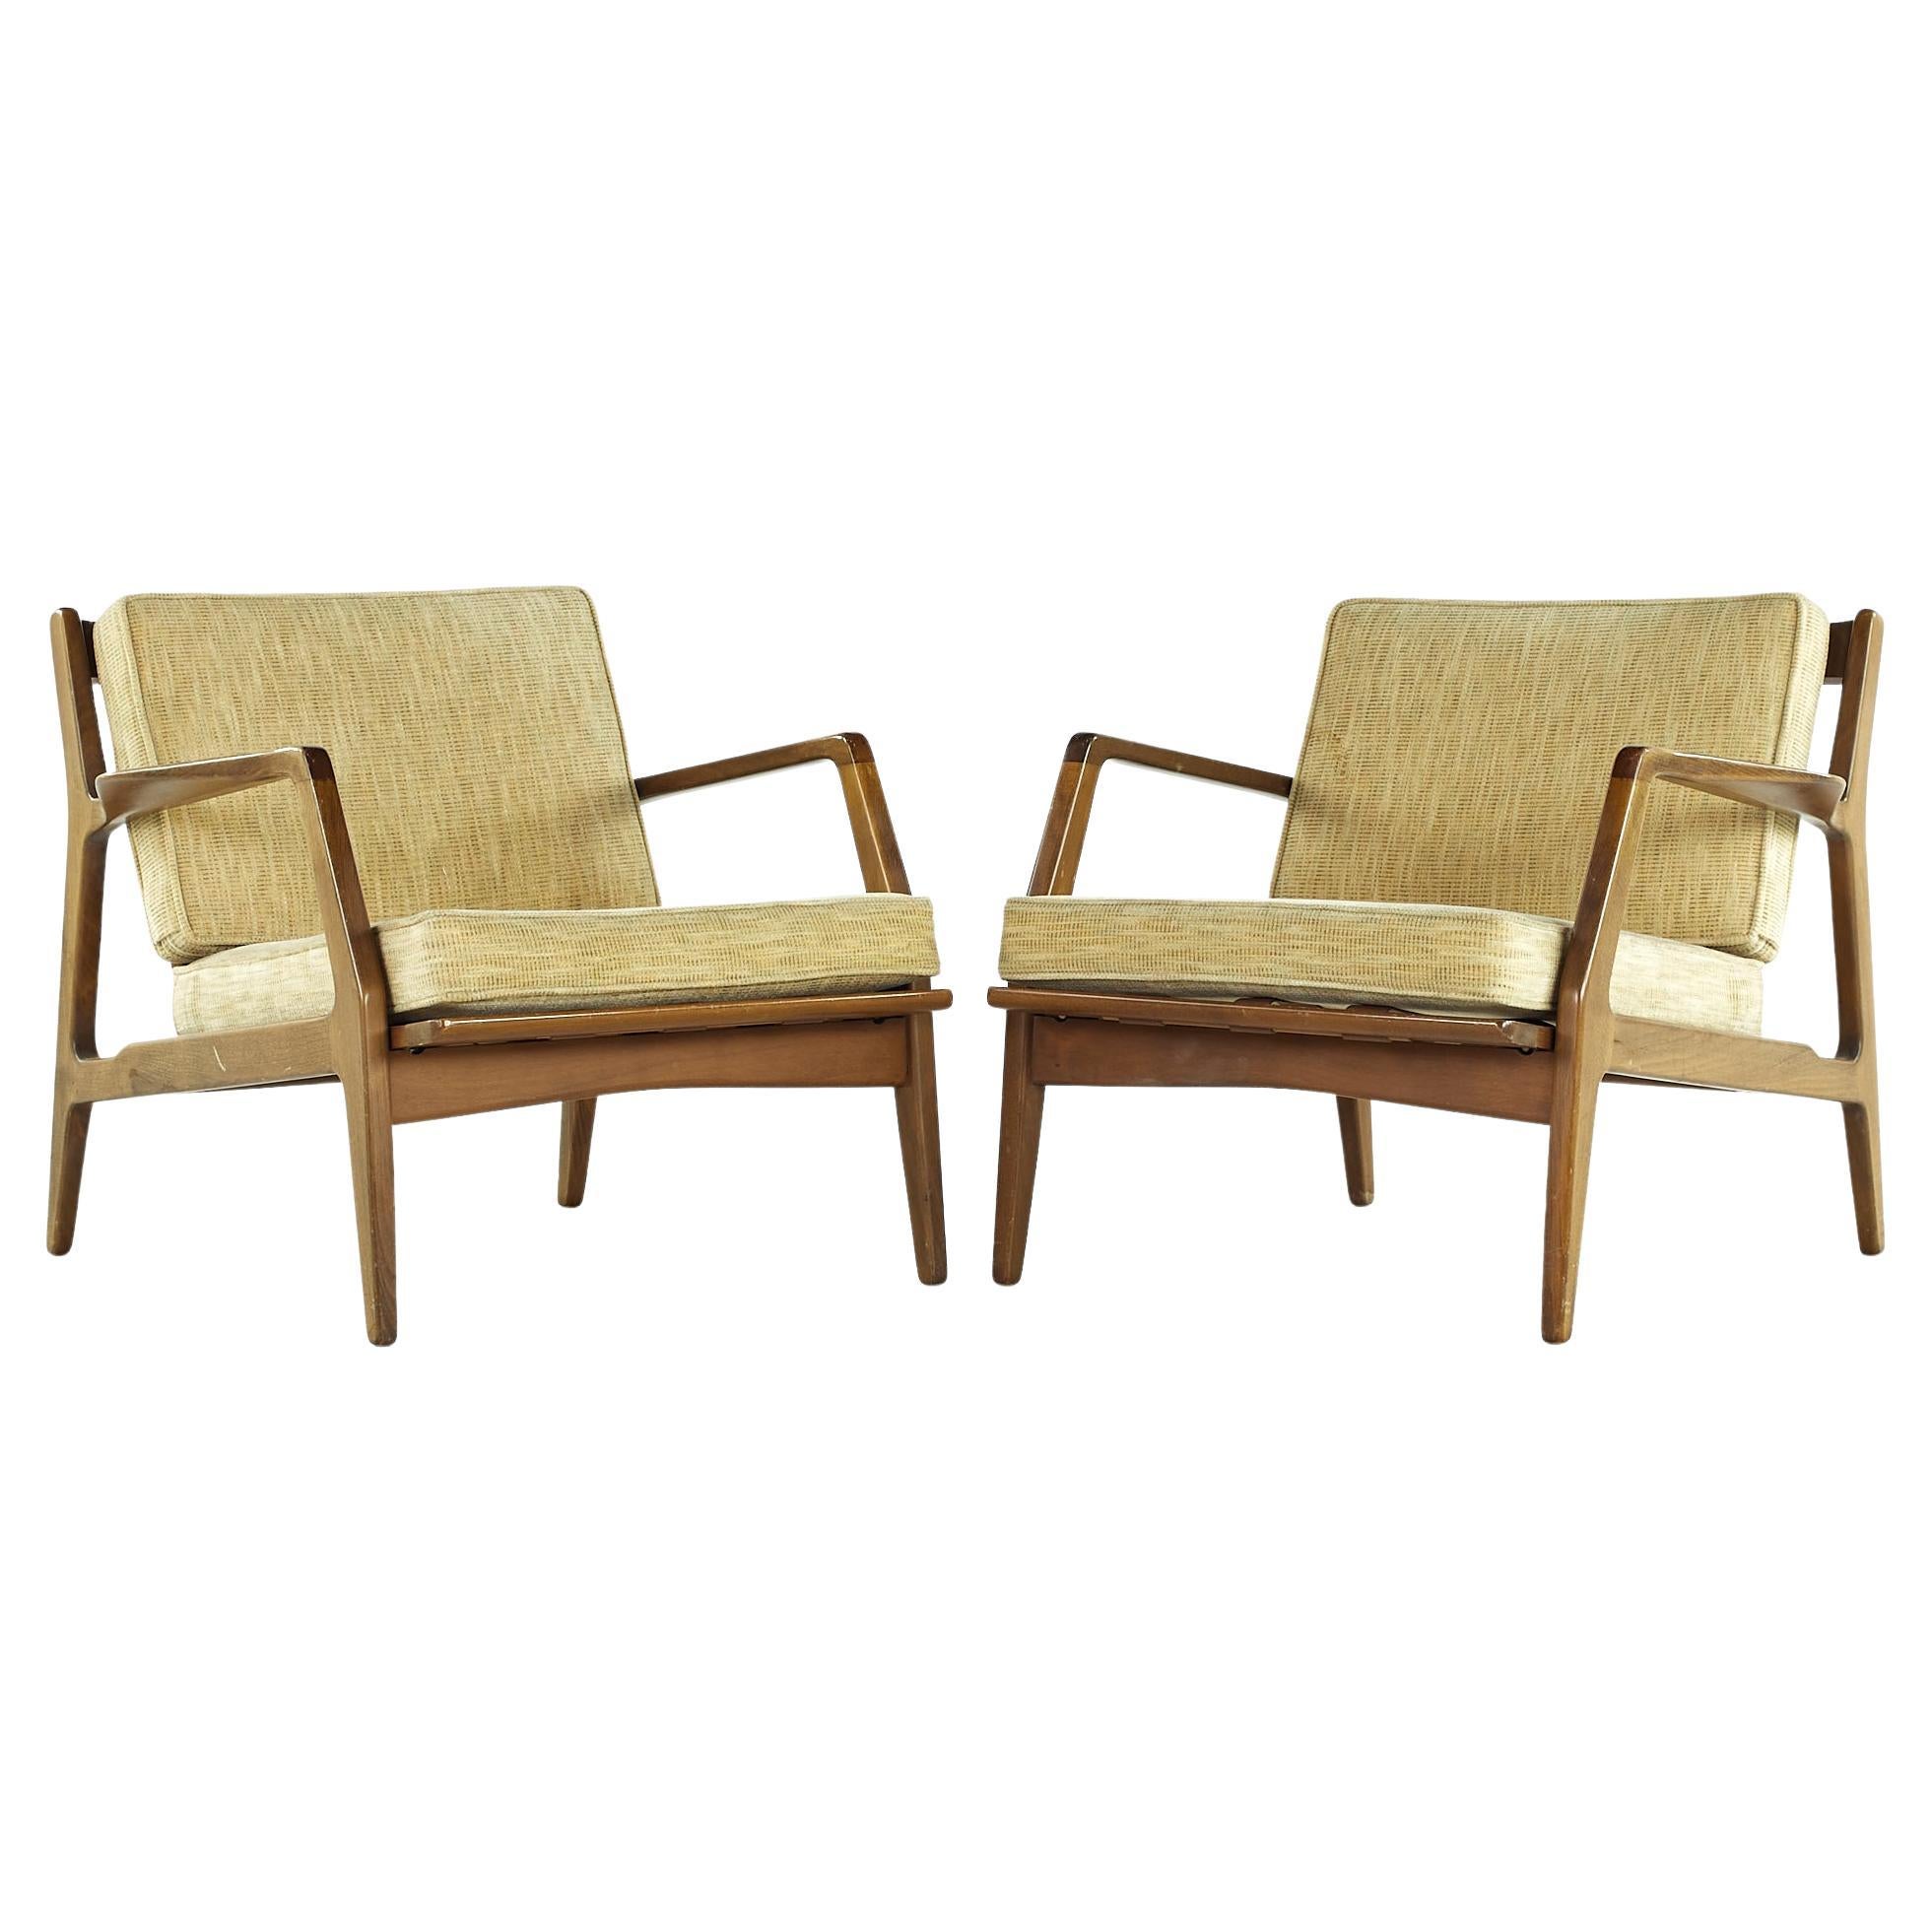 Lawrence Peabody Midcentury Walnut Lounge Chairs, Pair For Sale